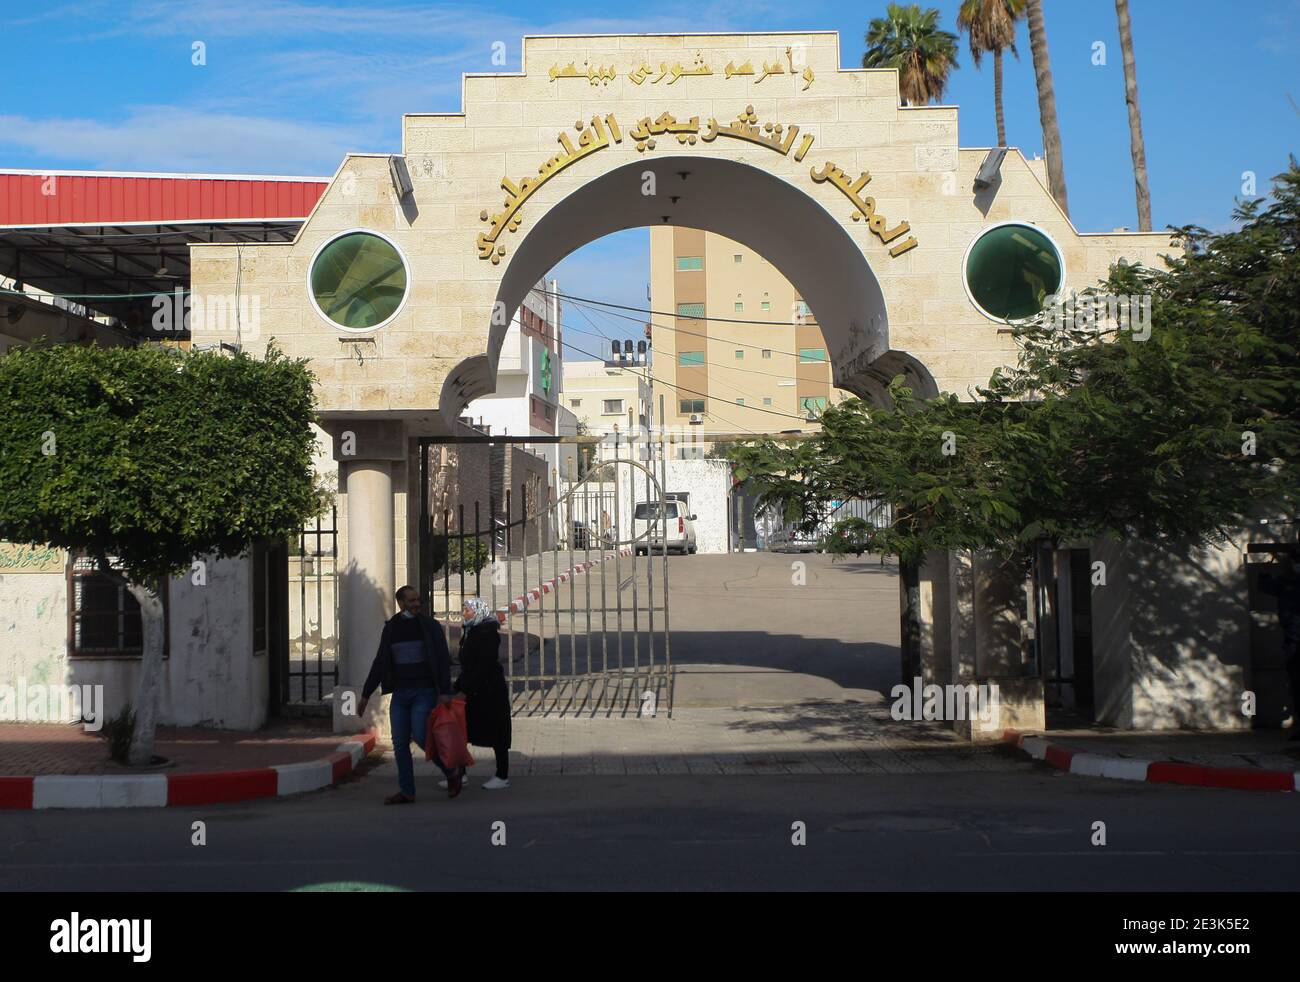 Palestinians walk past the entrance gate of the Legislative Council building in Gaza City on Tuesday on January 19, 2021. Palestinian president Mahmud Abbas on January 15, announced dates for the first elections in more than 15 years, setting legislative polls for May 22 and a July 31 presidential vote. Abbas's Fatah party, which controls the Palestinian Authority based in the occupied West Bank and the Hamas Islamists, who hold power in Gaza, have for years expressed interest in taking Palestinians back to the polls. Photo by Ismael Mohamad/UPI Stock Photo